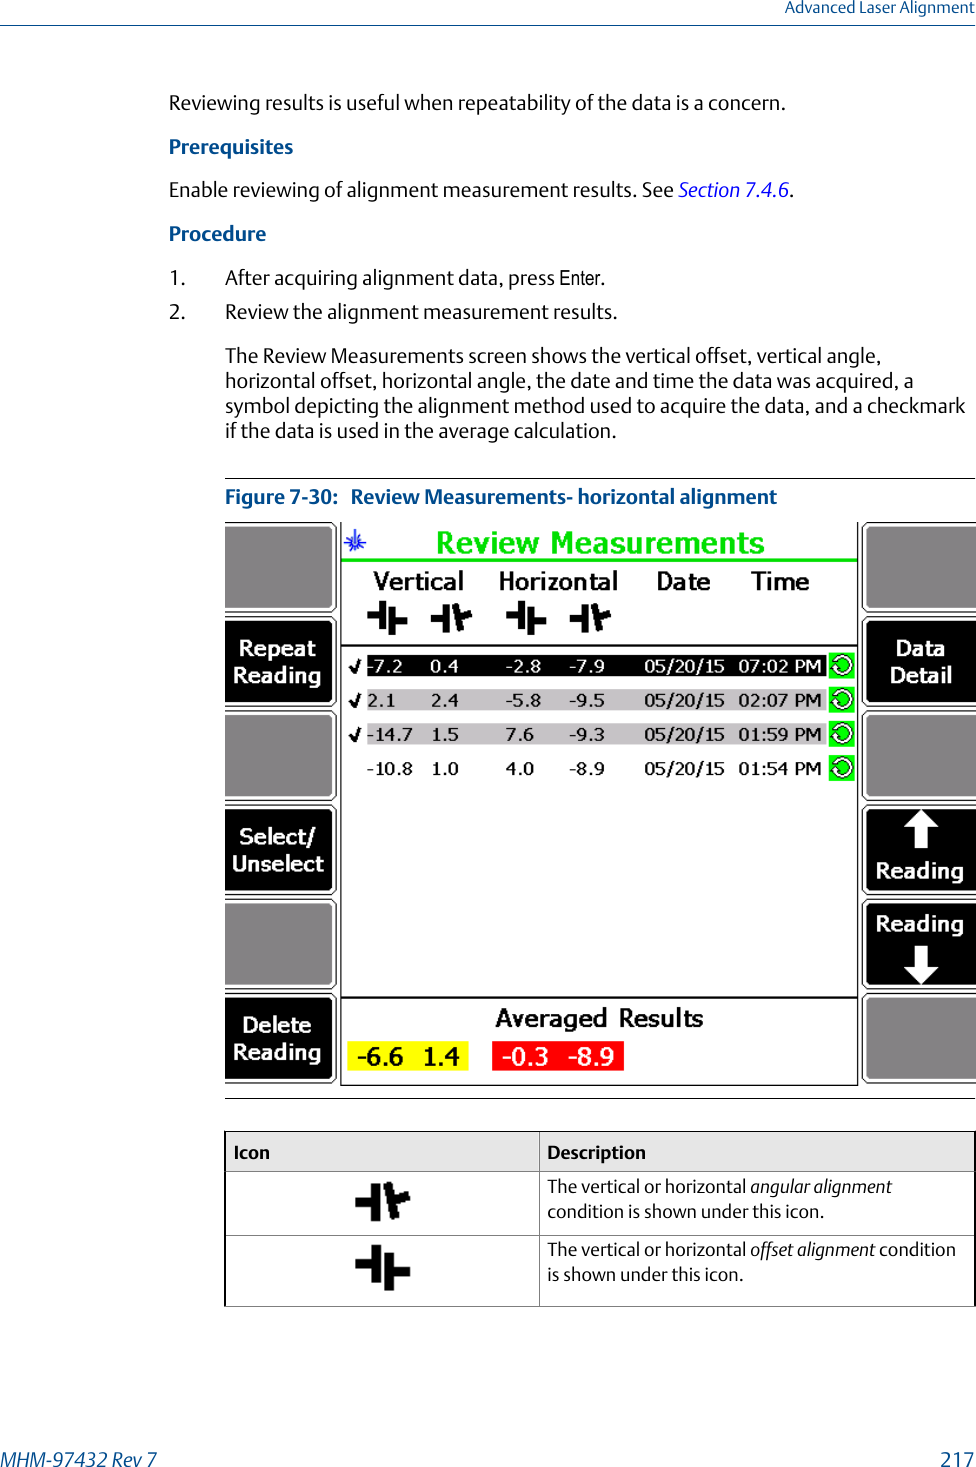 Reviewing results is useful when repeatability of the data is a concern.PrerequisitesEnable reviewing of alignment measurement results. See Section 7.4.6.Procedure1. After acquiring alignment data, press Enter.2. Review the alignment measurement results.The Review Measurements screen shows the vertical offset, vertical angle,horizontal offset, horizontal angle, the date and time the data was acquired, asymbol depicting the alignment method used to acquire the data, and a checkmarkif the data is used in the average calculation.Review Measurements- horizontal alignmentFigure 7-30:   Icon DescriptionThe vertical or horizontal angular alignmentcondition is shown under this icon.The vertical or horizontal offset alignment conditionis shown under this icon.Advanced Laser AlignmentMHM-97432 Rev 7  217